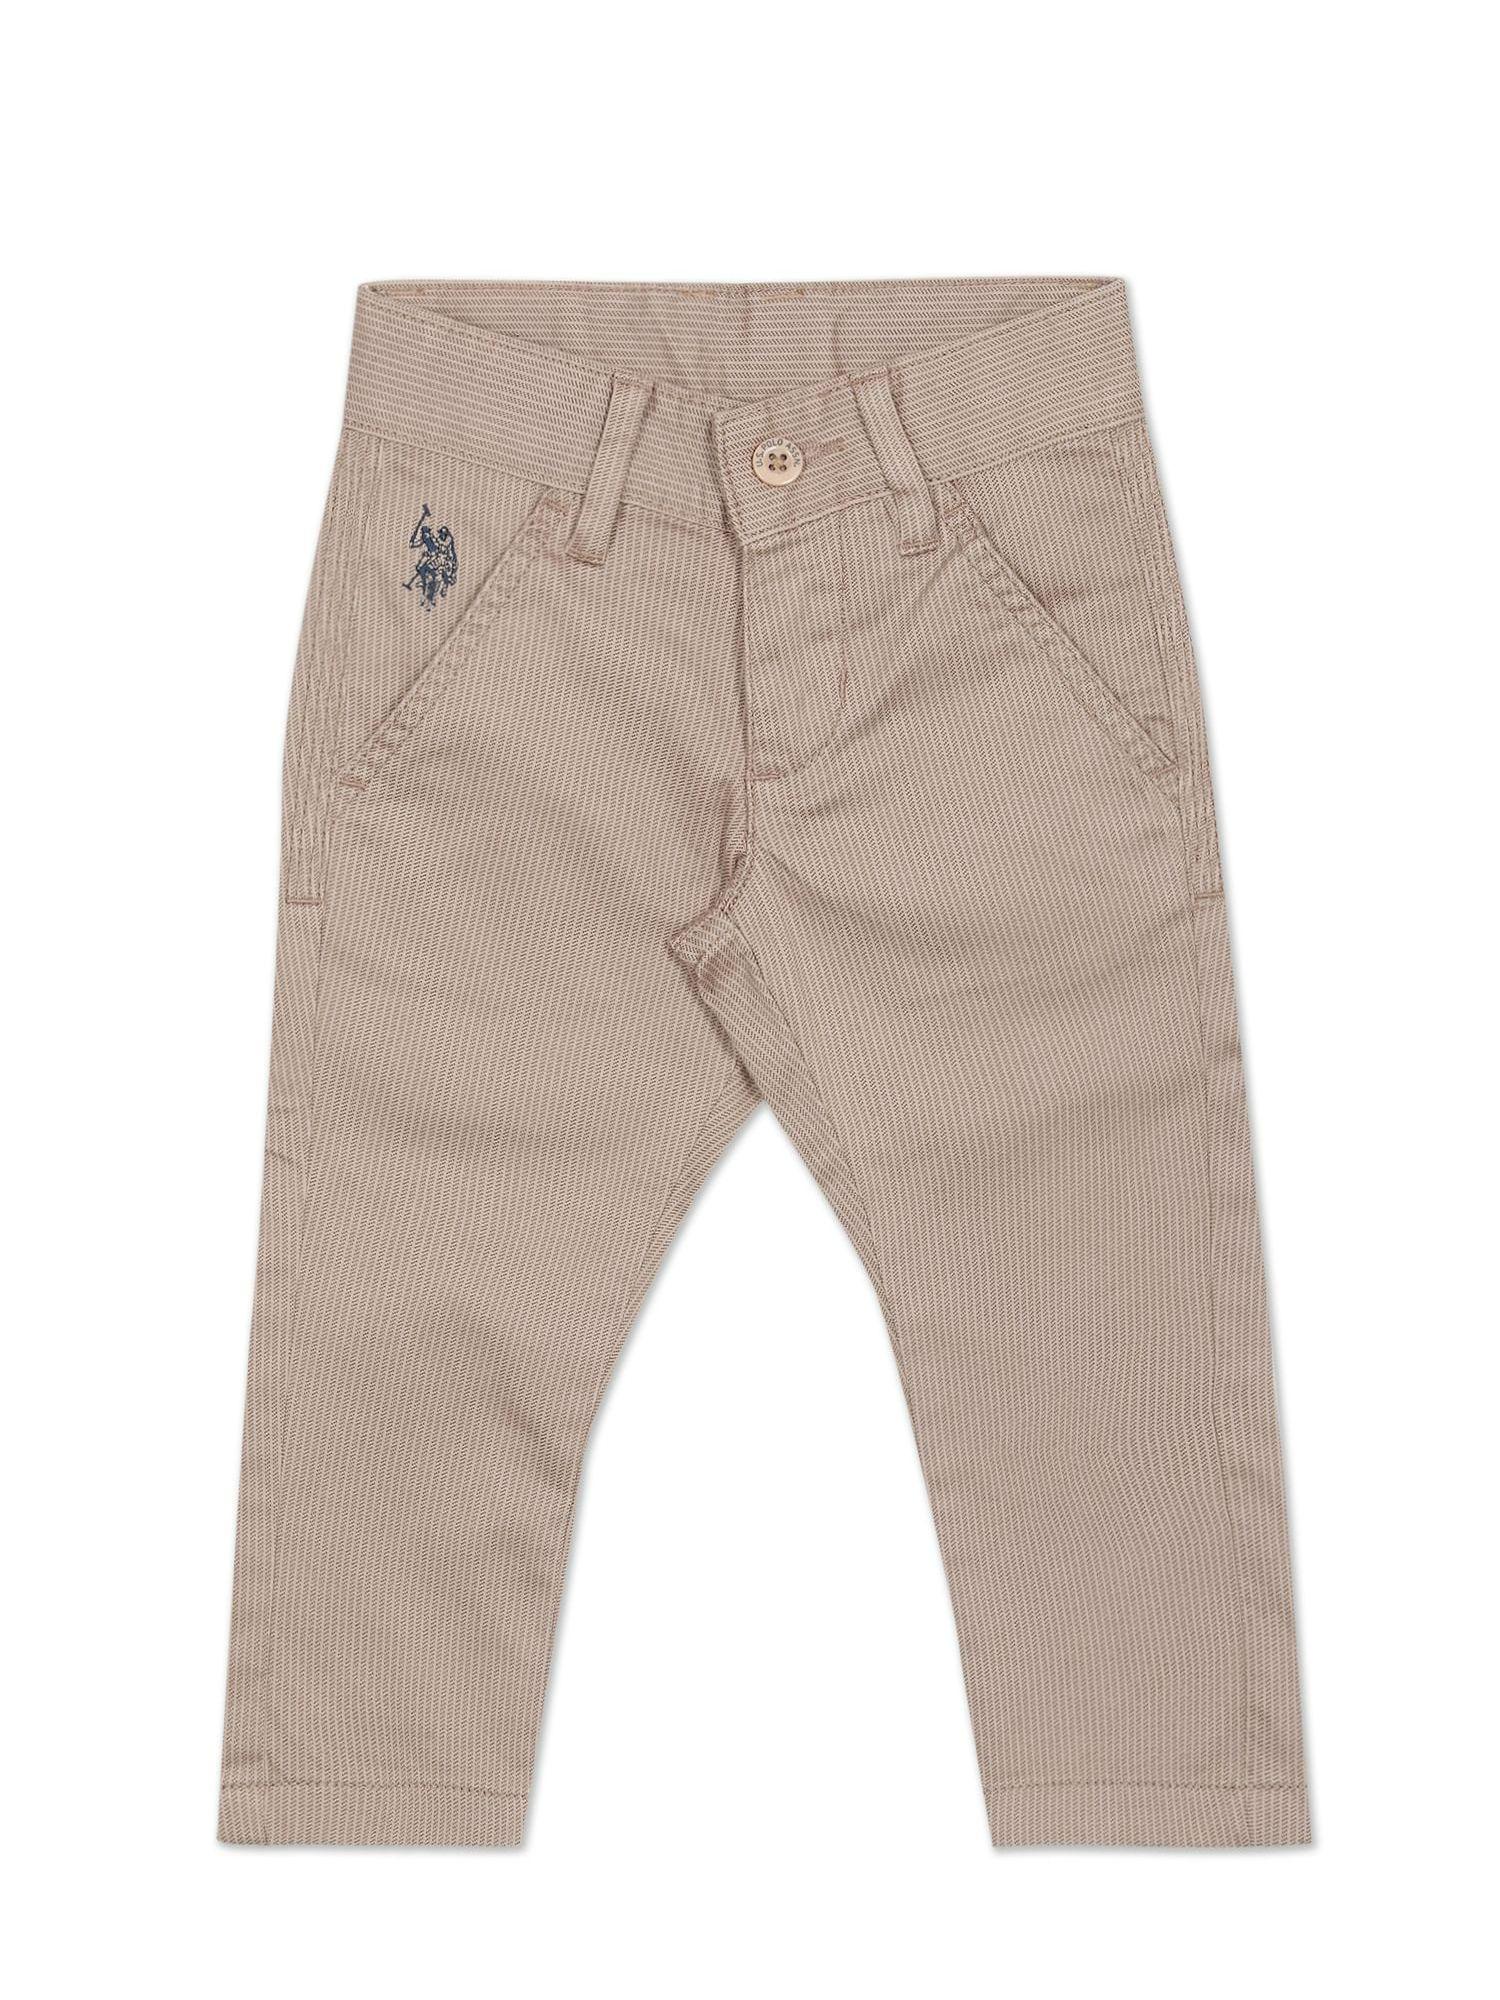 boys-beige-mid-rise-striped-casual-trousers